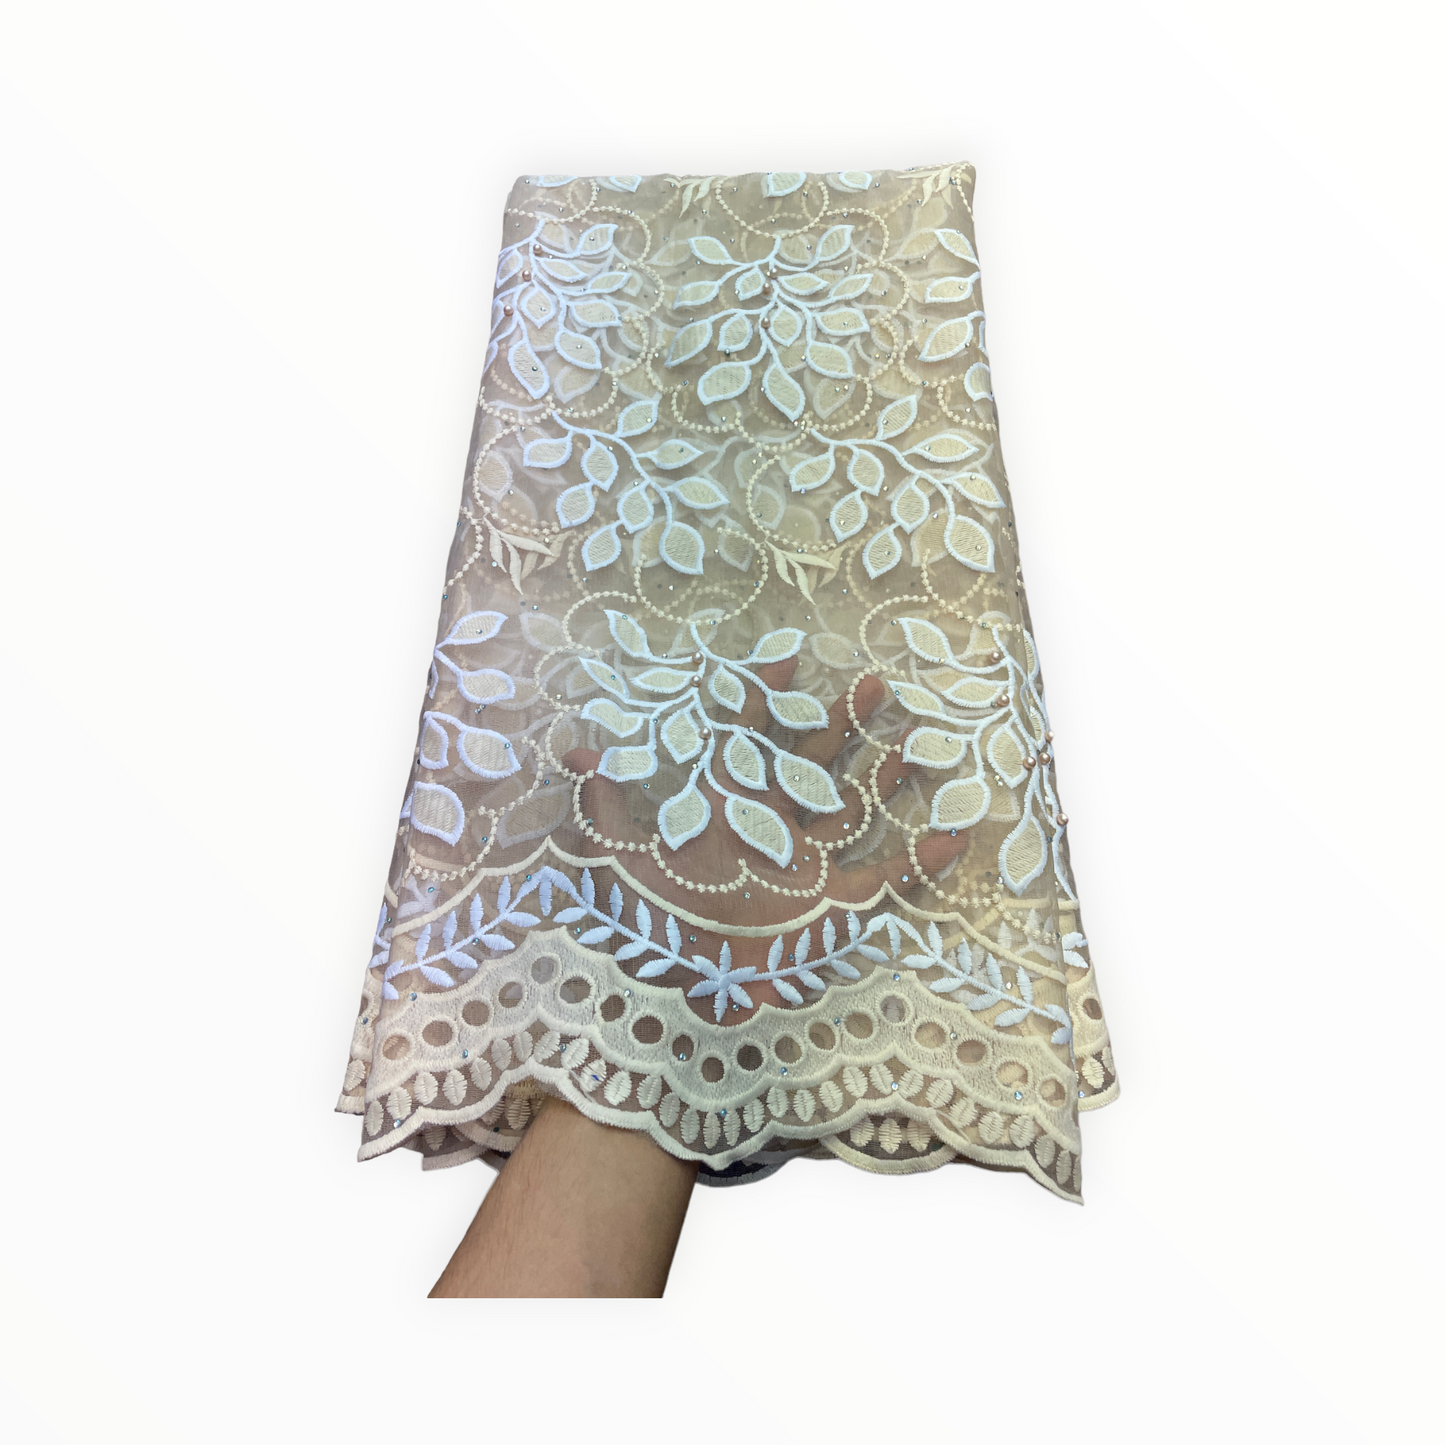 Beige french lace - 5 yards